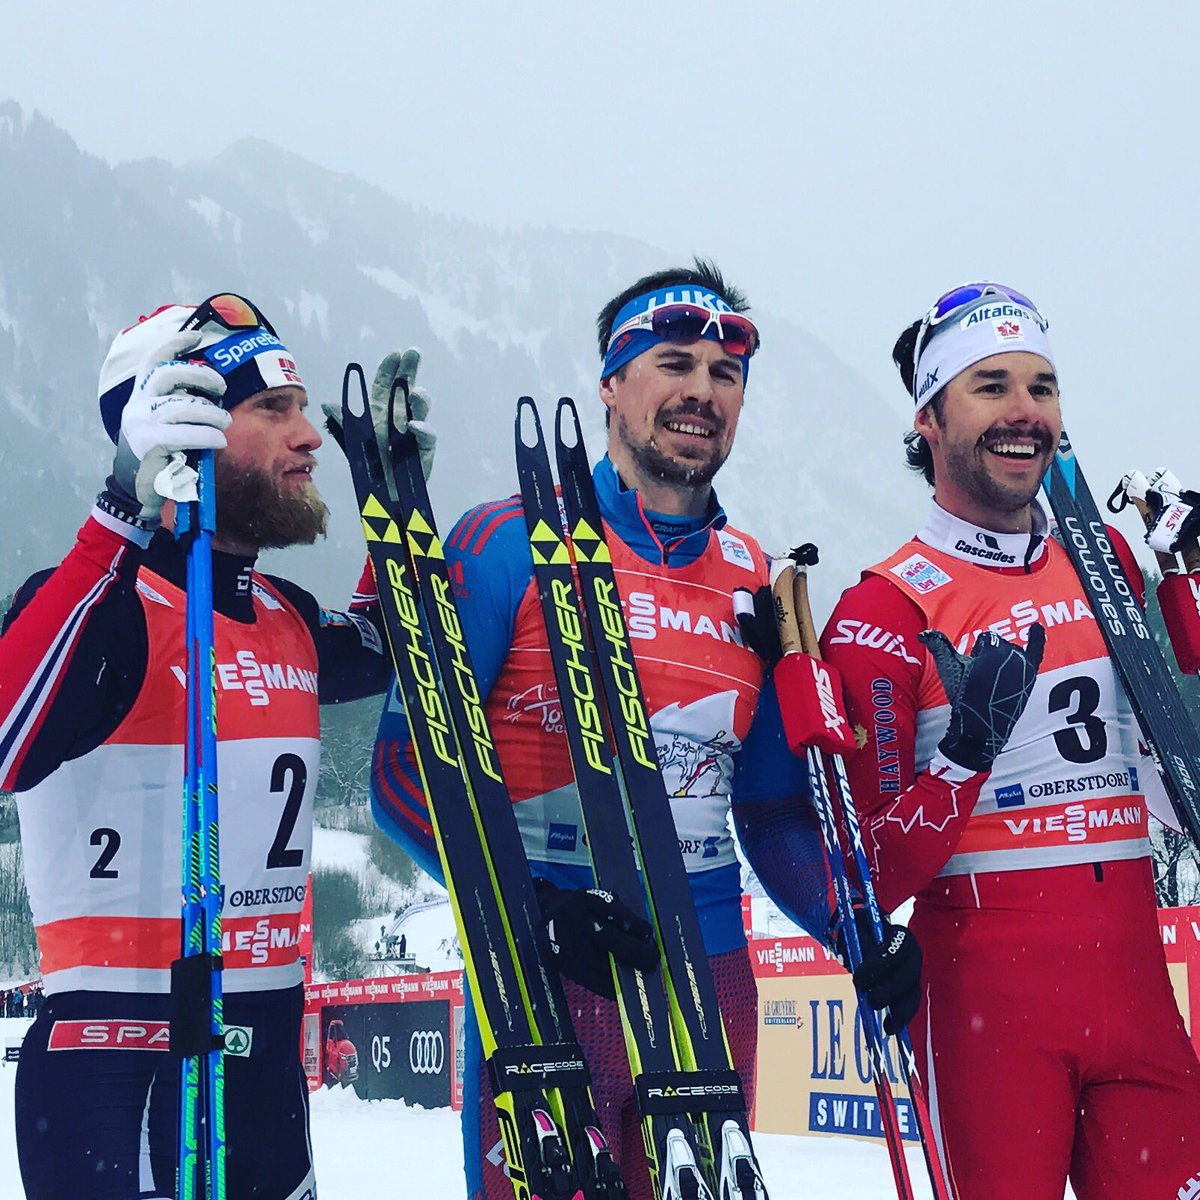 The men's 15 k freestyle pursuit podium at Stage 4 of the Tour de Ski in Oberstdorf, Germany, with Russian winner Sergey Ustiugov (c), Norway's Martin Johnsrud Sundby (l) in second, and Canada's Alex Harvey (r) in third. (Photo: FIS Cross Country/Twitter)